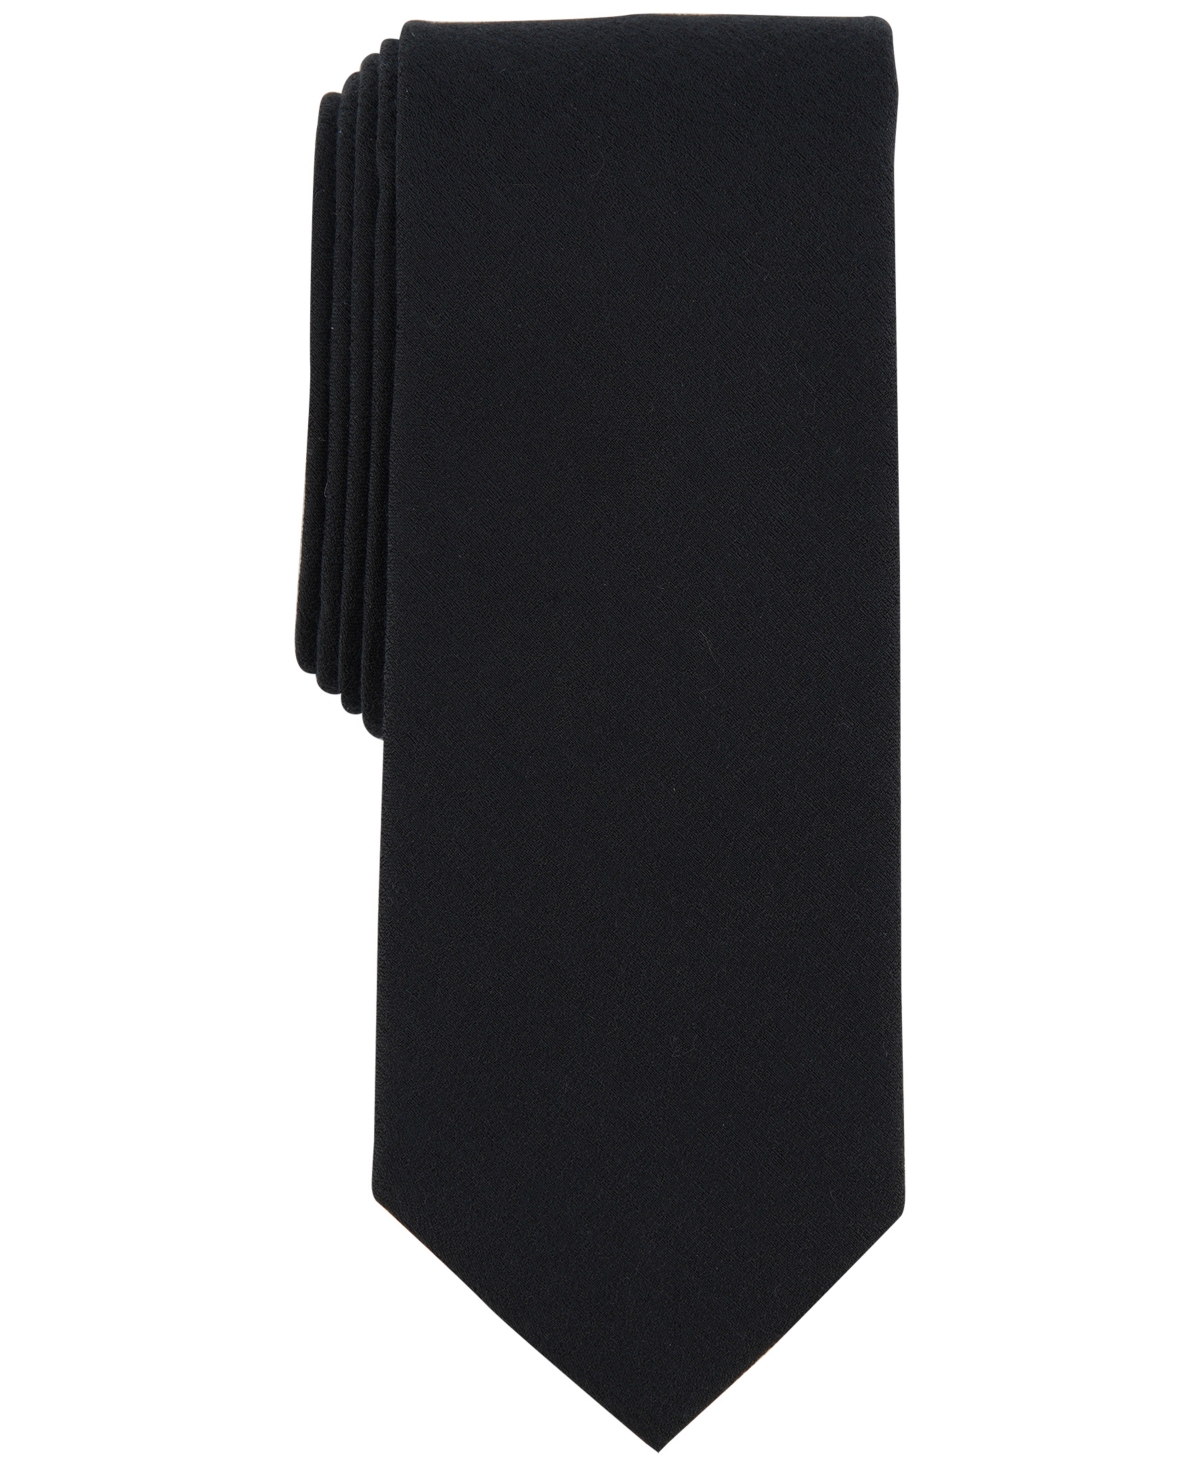 Men's Bolans Solid Tie, Created for Macy's - Black